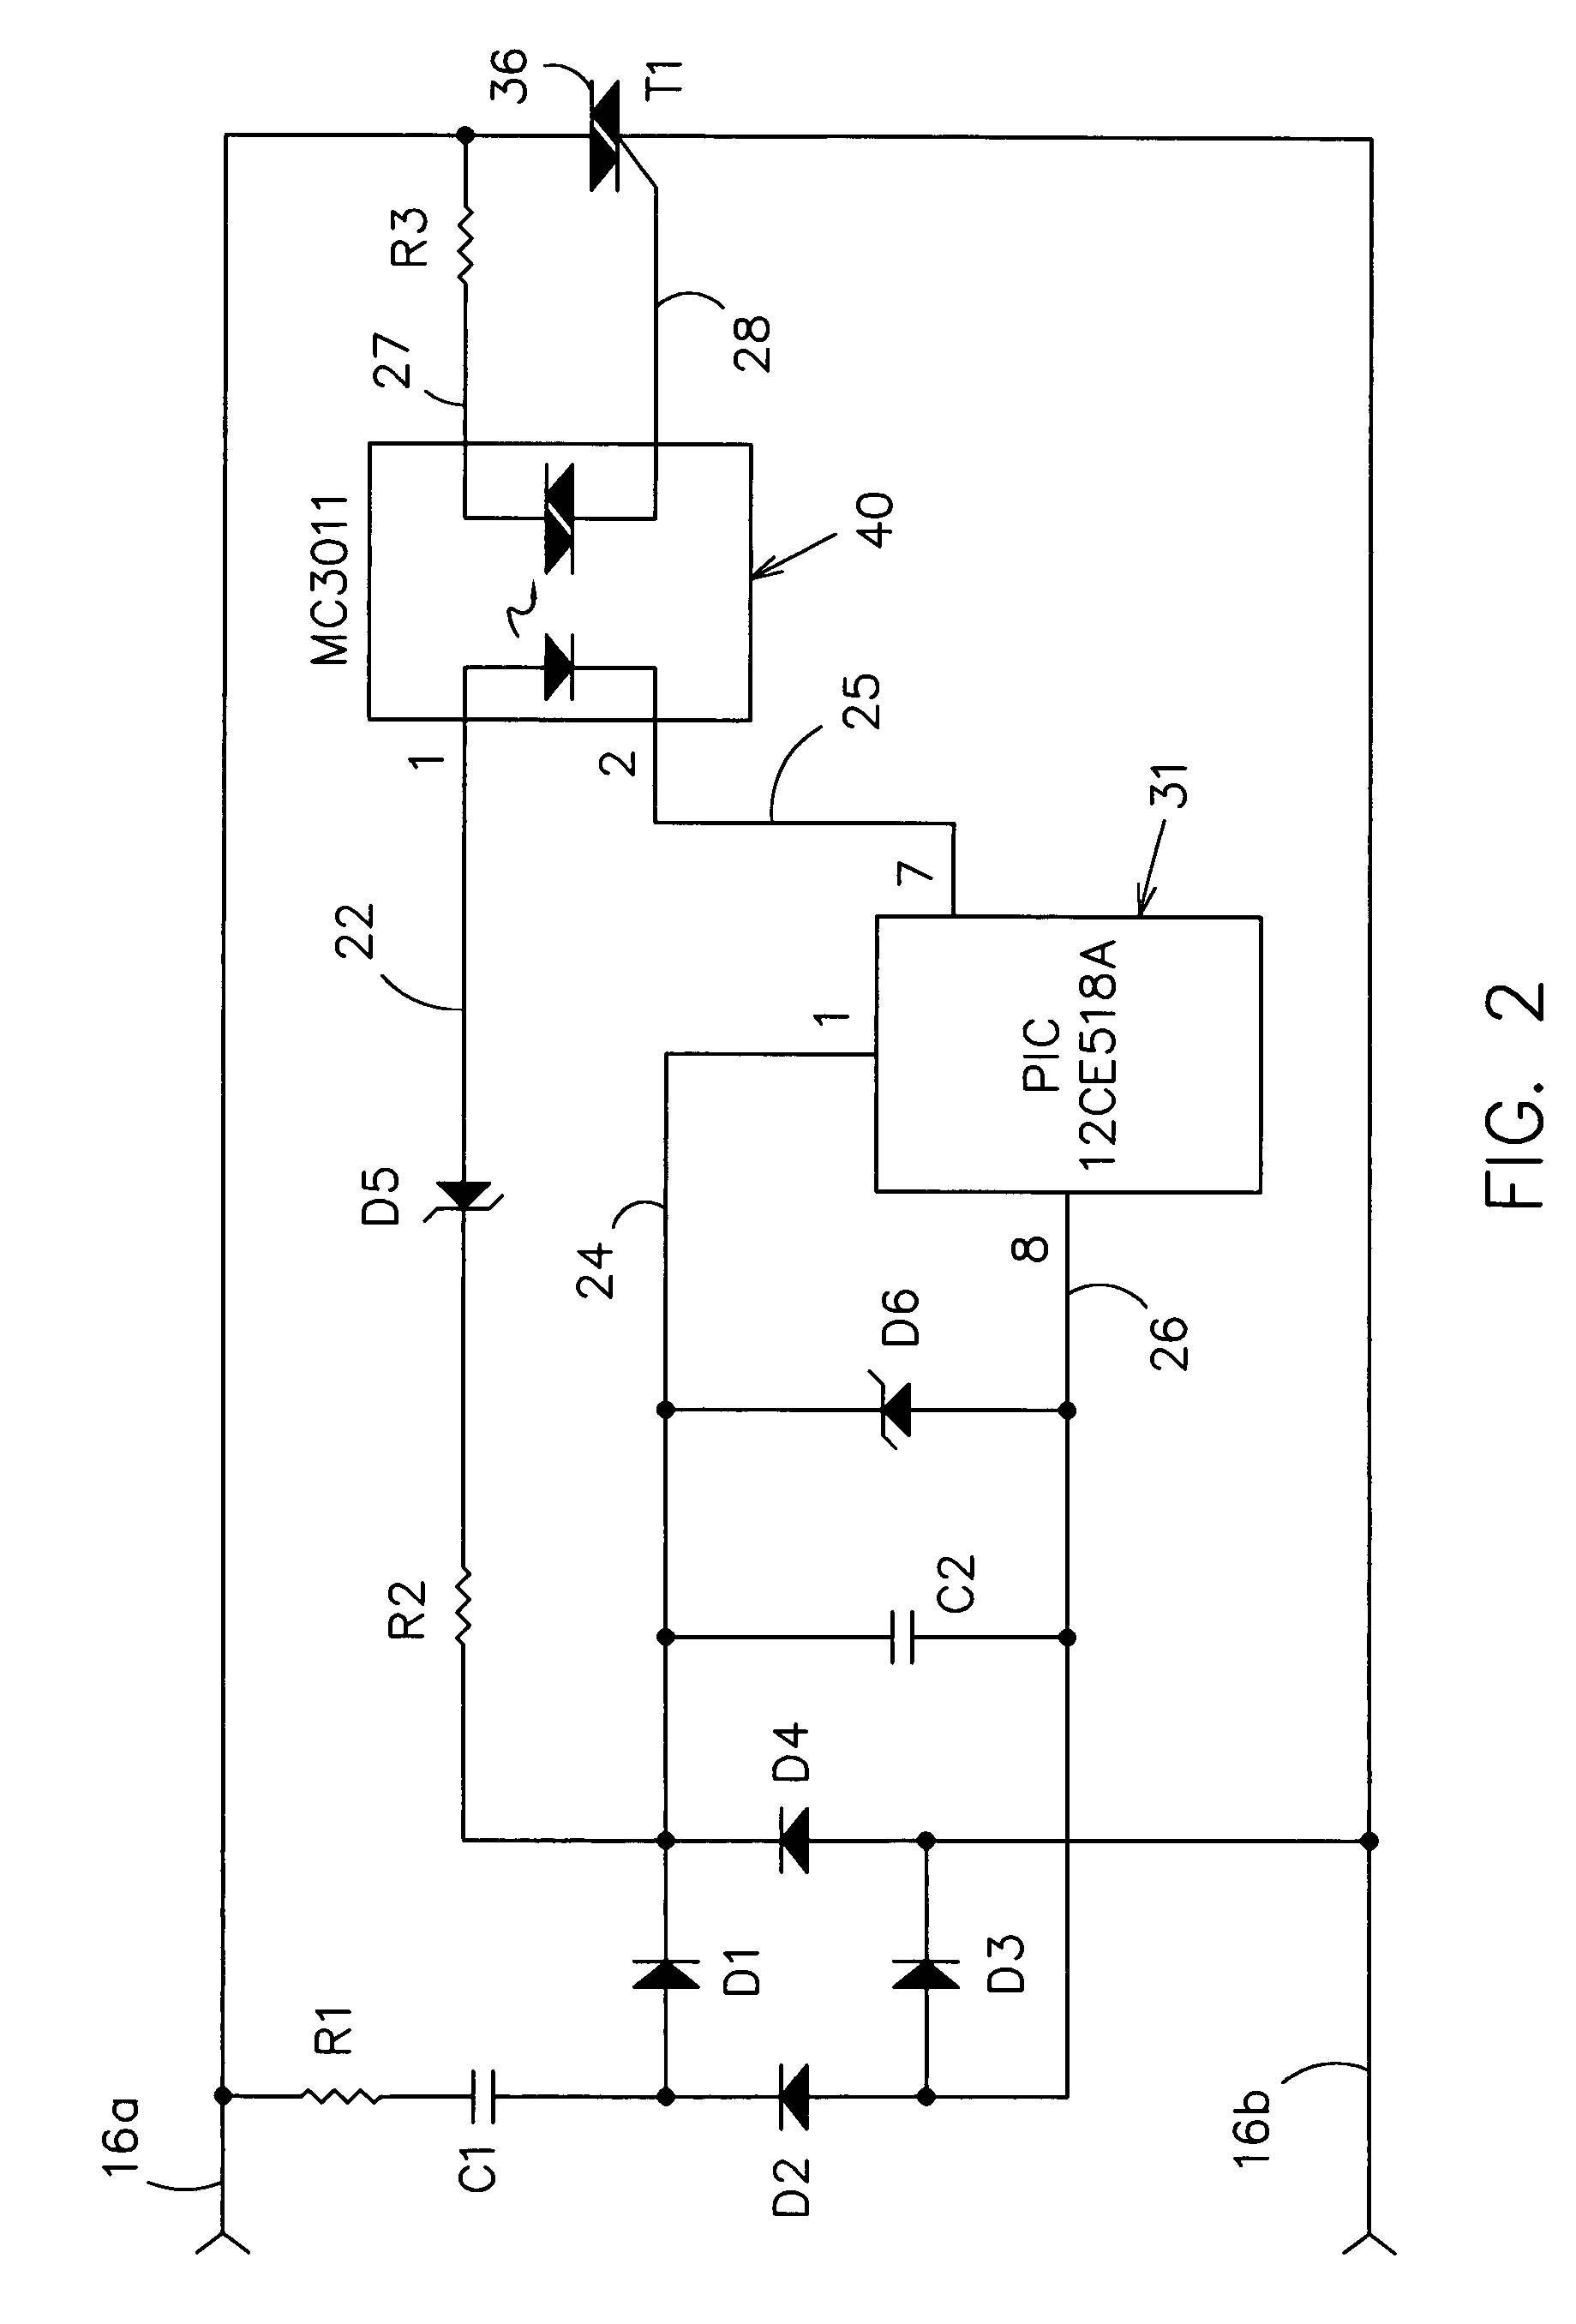 Programmable AC power switch